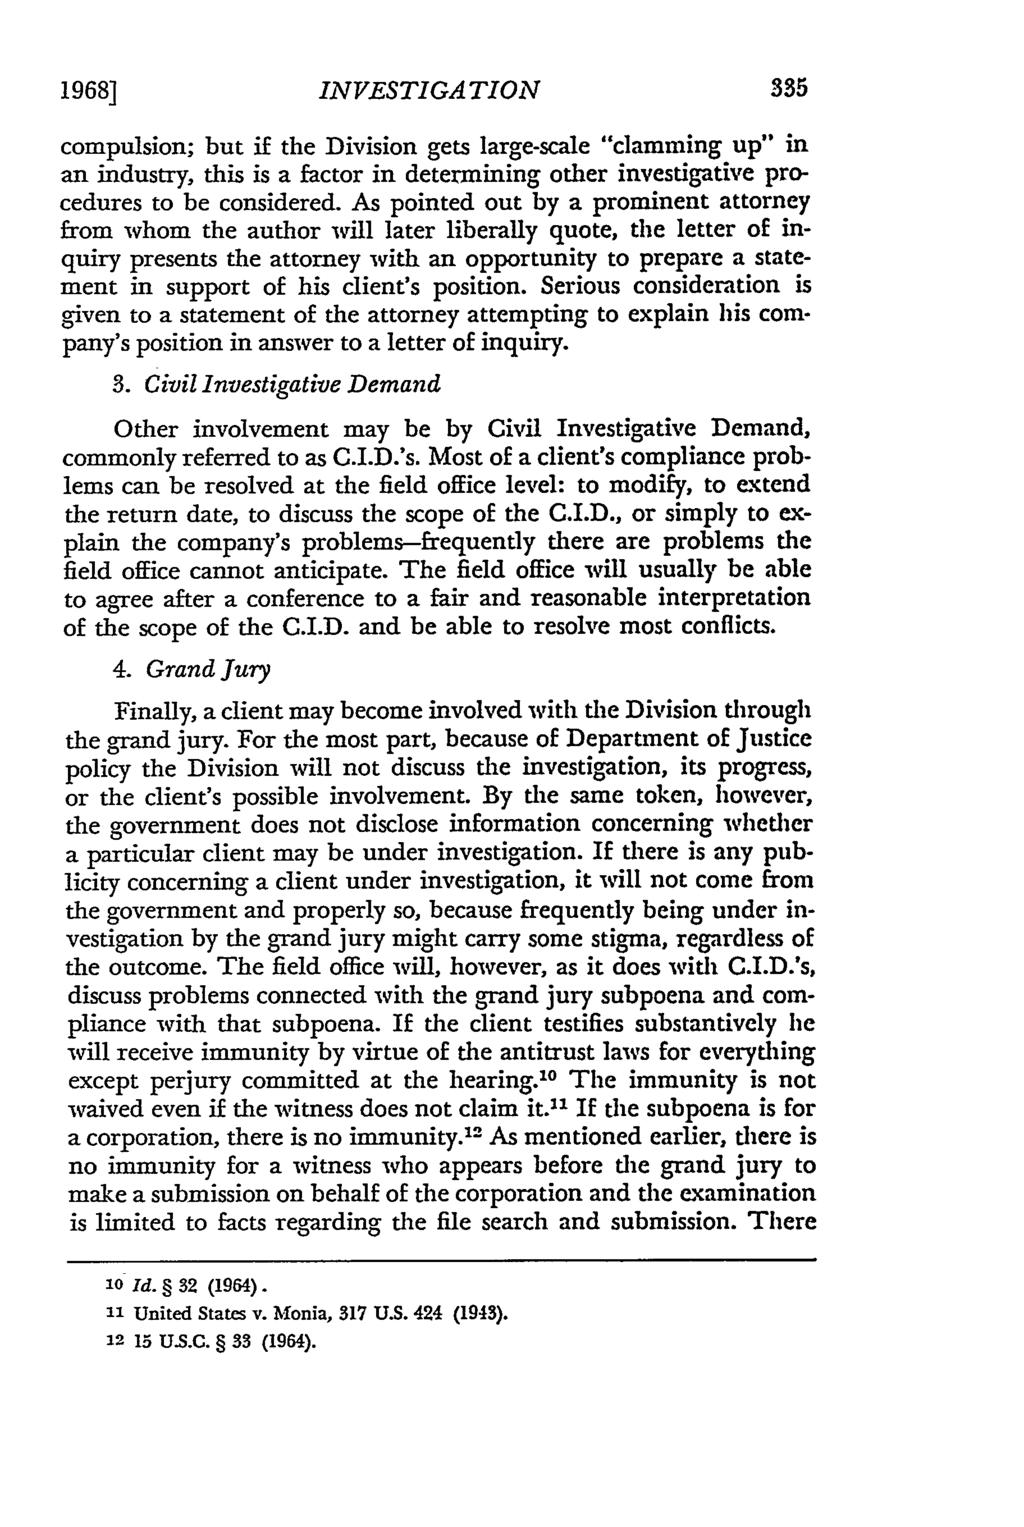 1968] INVESTIGATION compulsion; but if the Division gets large-scale "clamming up" in an industry, this is a factor in determining other investigative procedures to be considered.